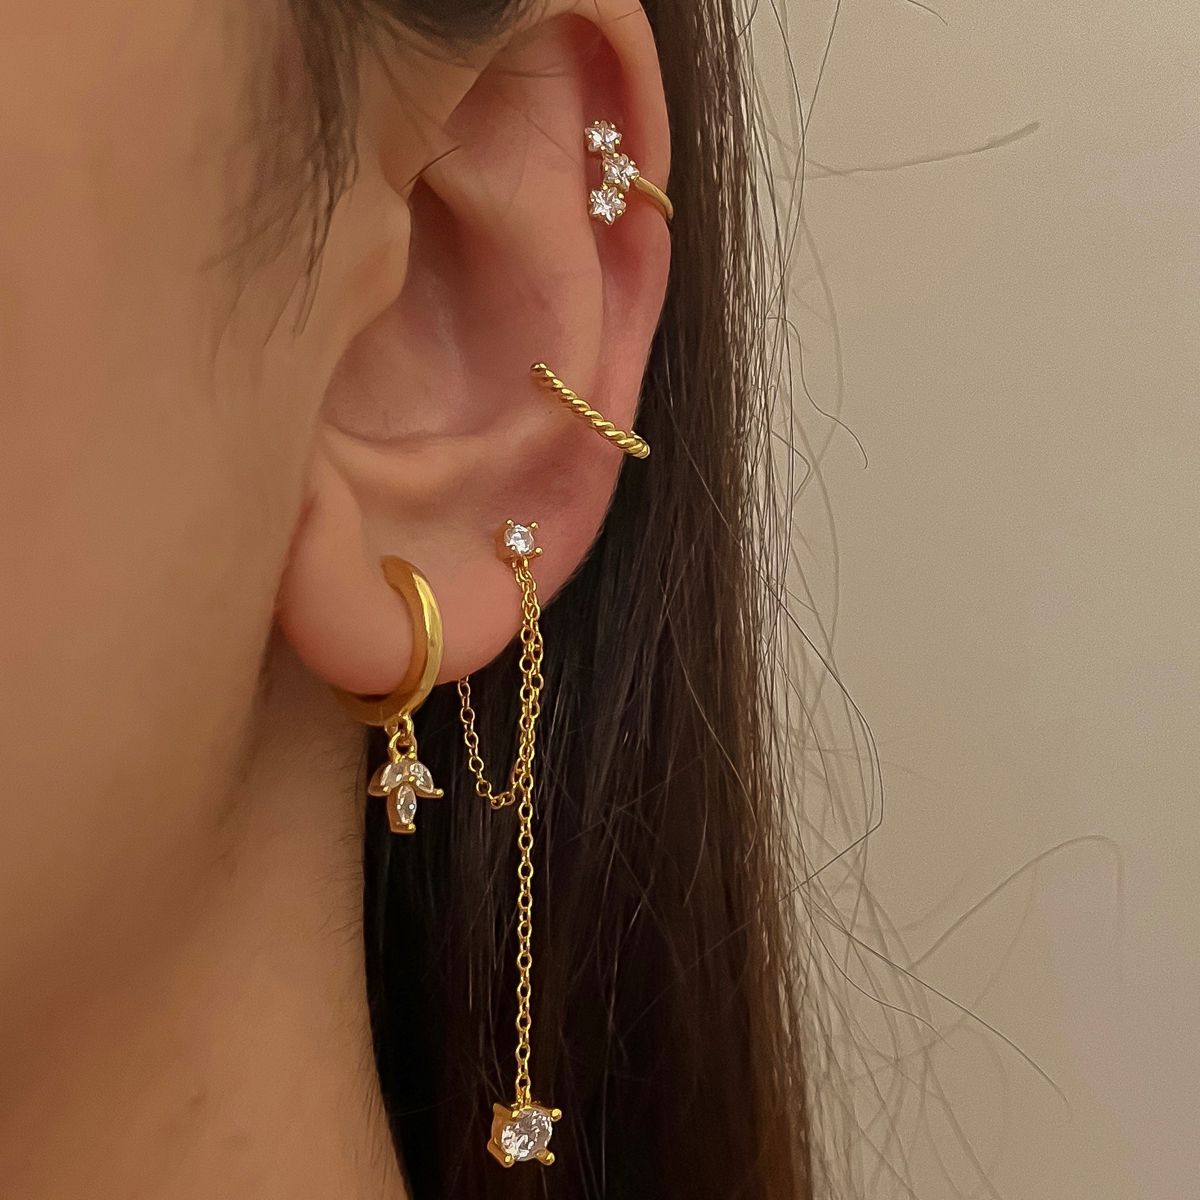 Gold Earrings Designs: Timeless Pieces for Every Occasion